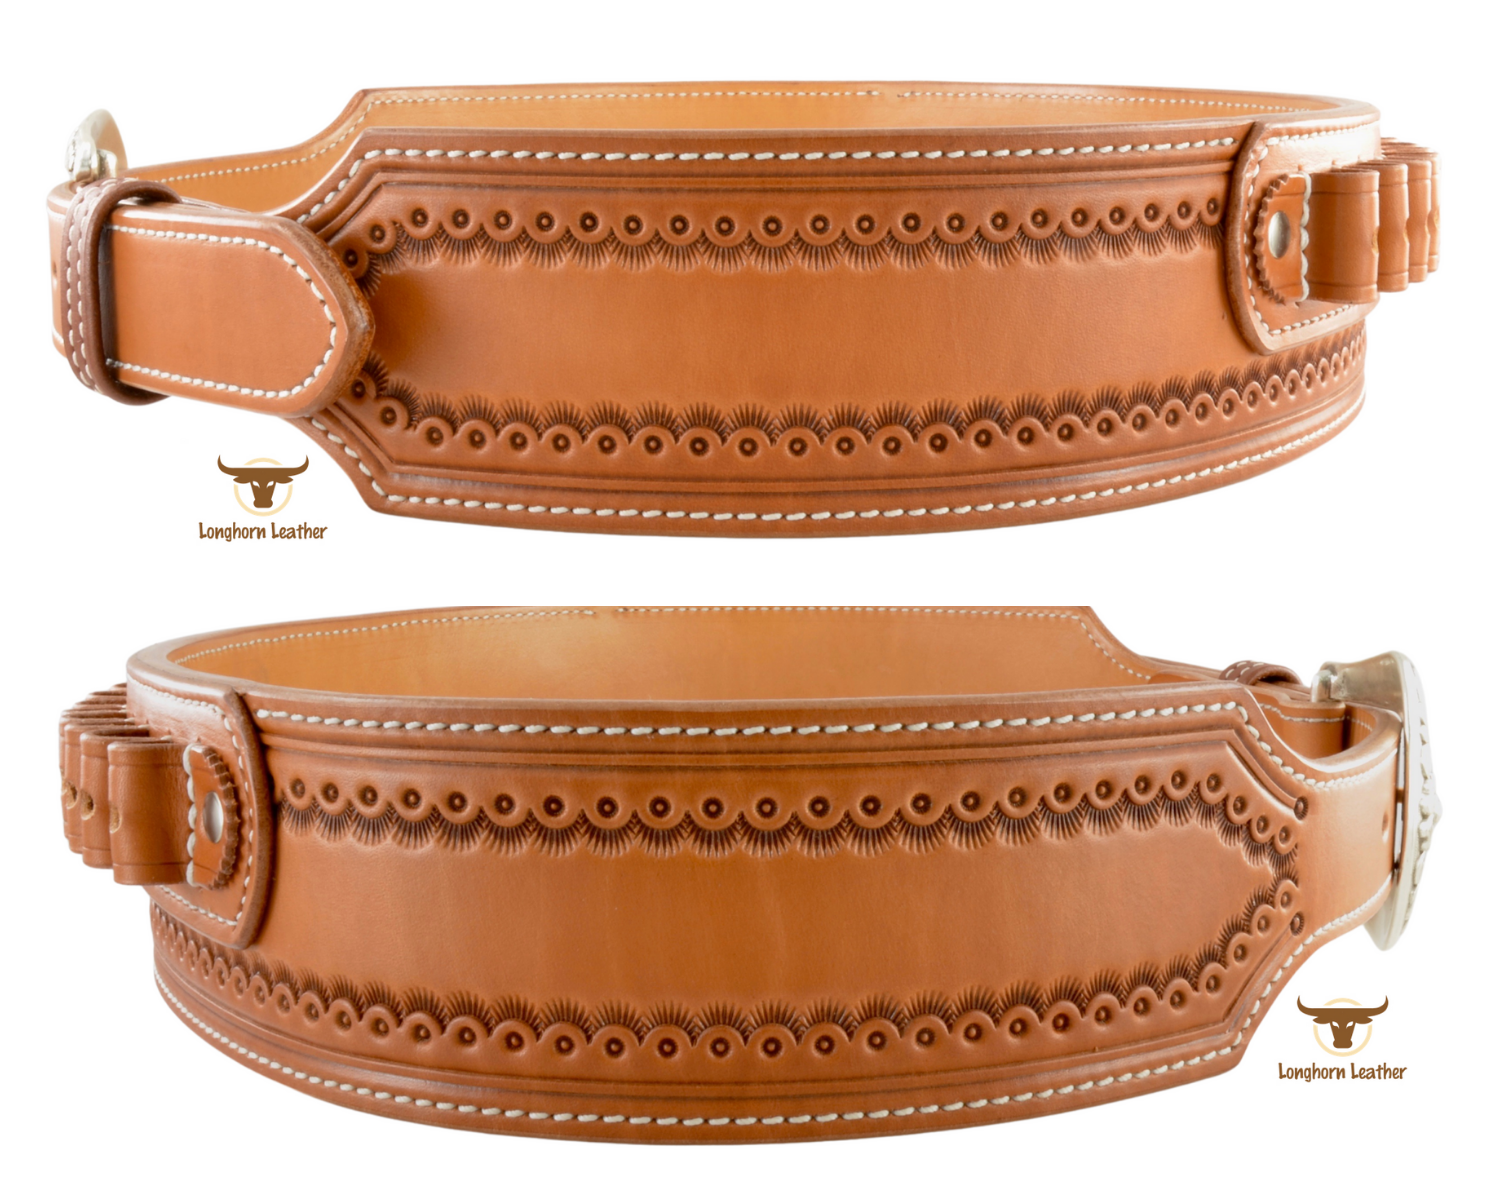 Custom leather cartridge belt featuring the "Cimarron" design.  Individually handcrafted at Longhorn Leather AZ.